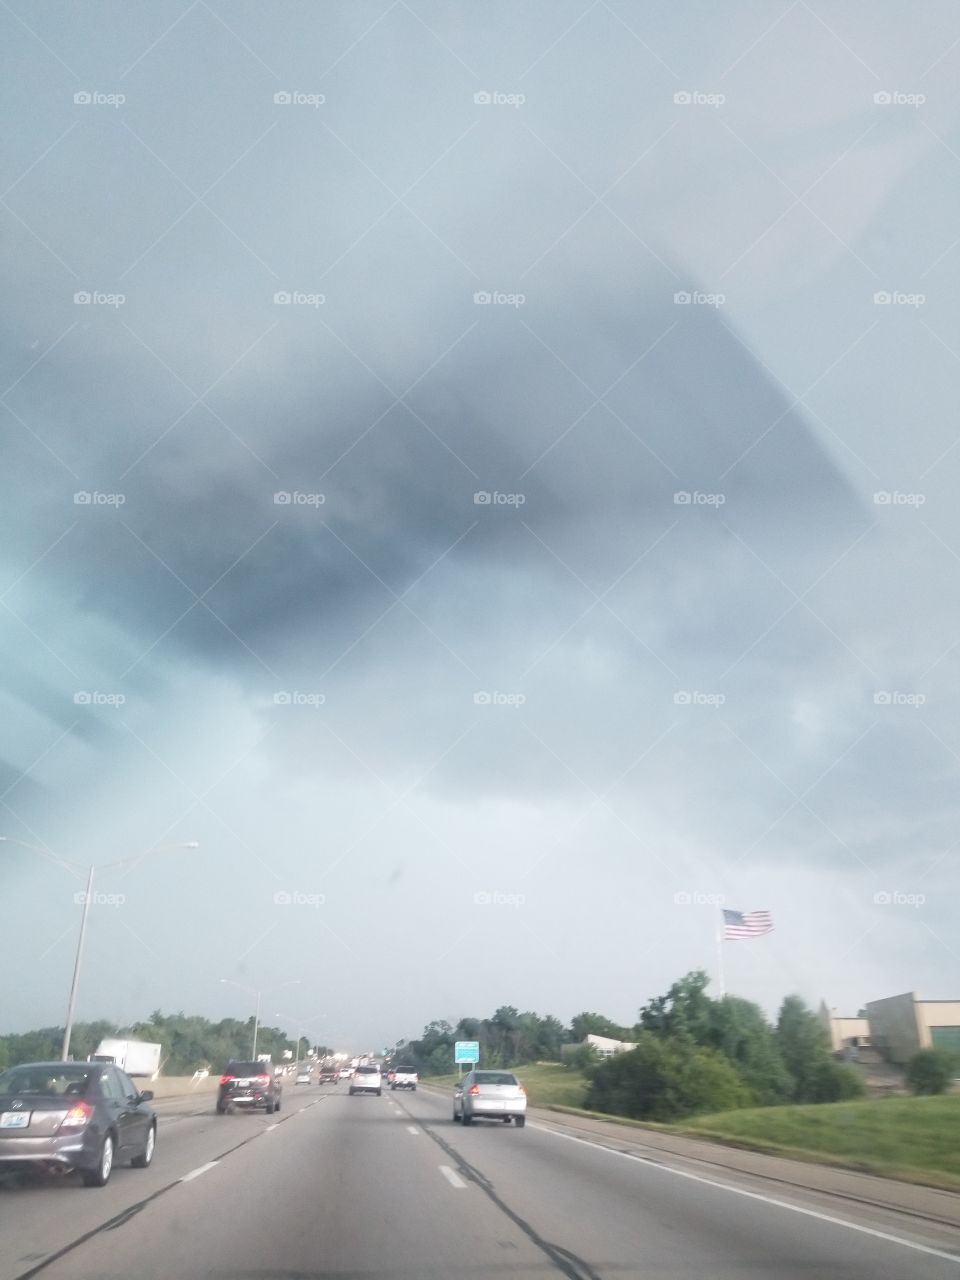 cloudy, overcast highway